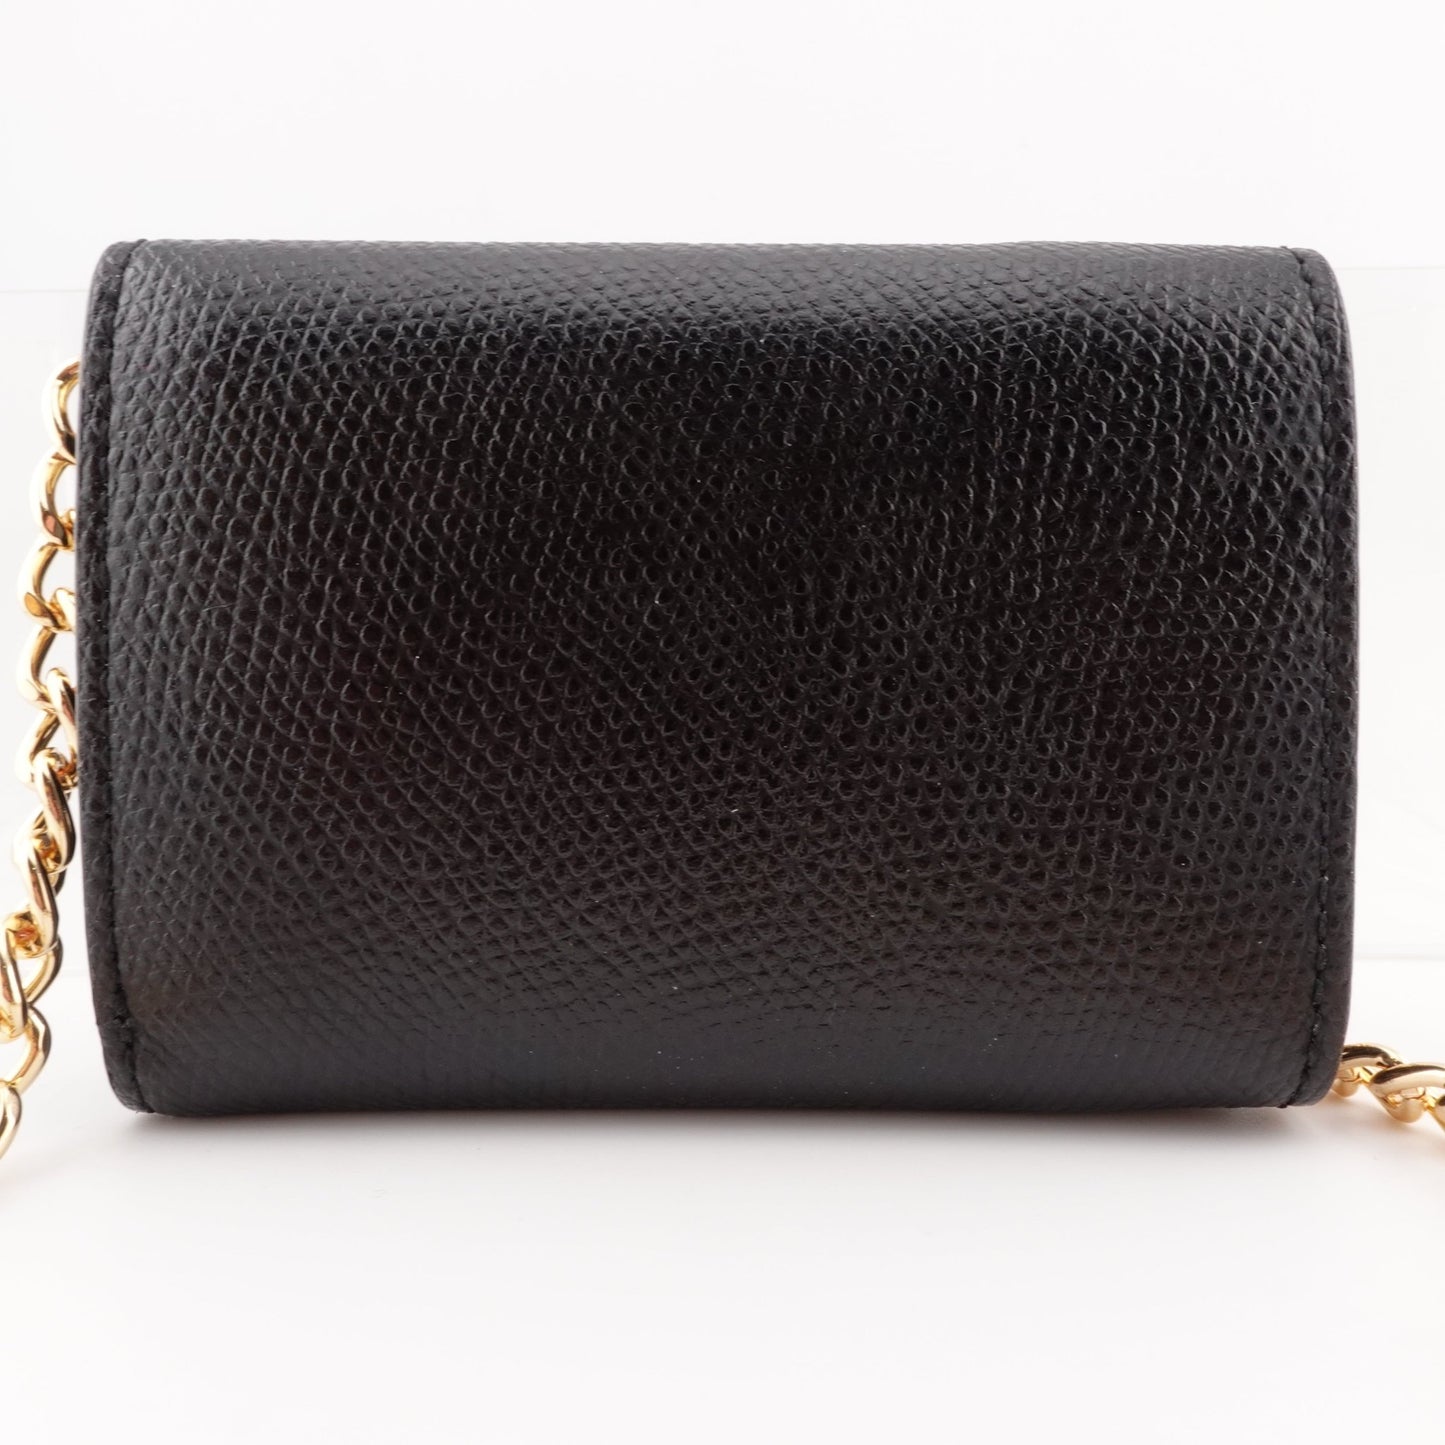 FENDI Leather Compact Trifold Wallet on Adjustable Chain - Bag Envy